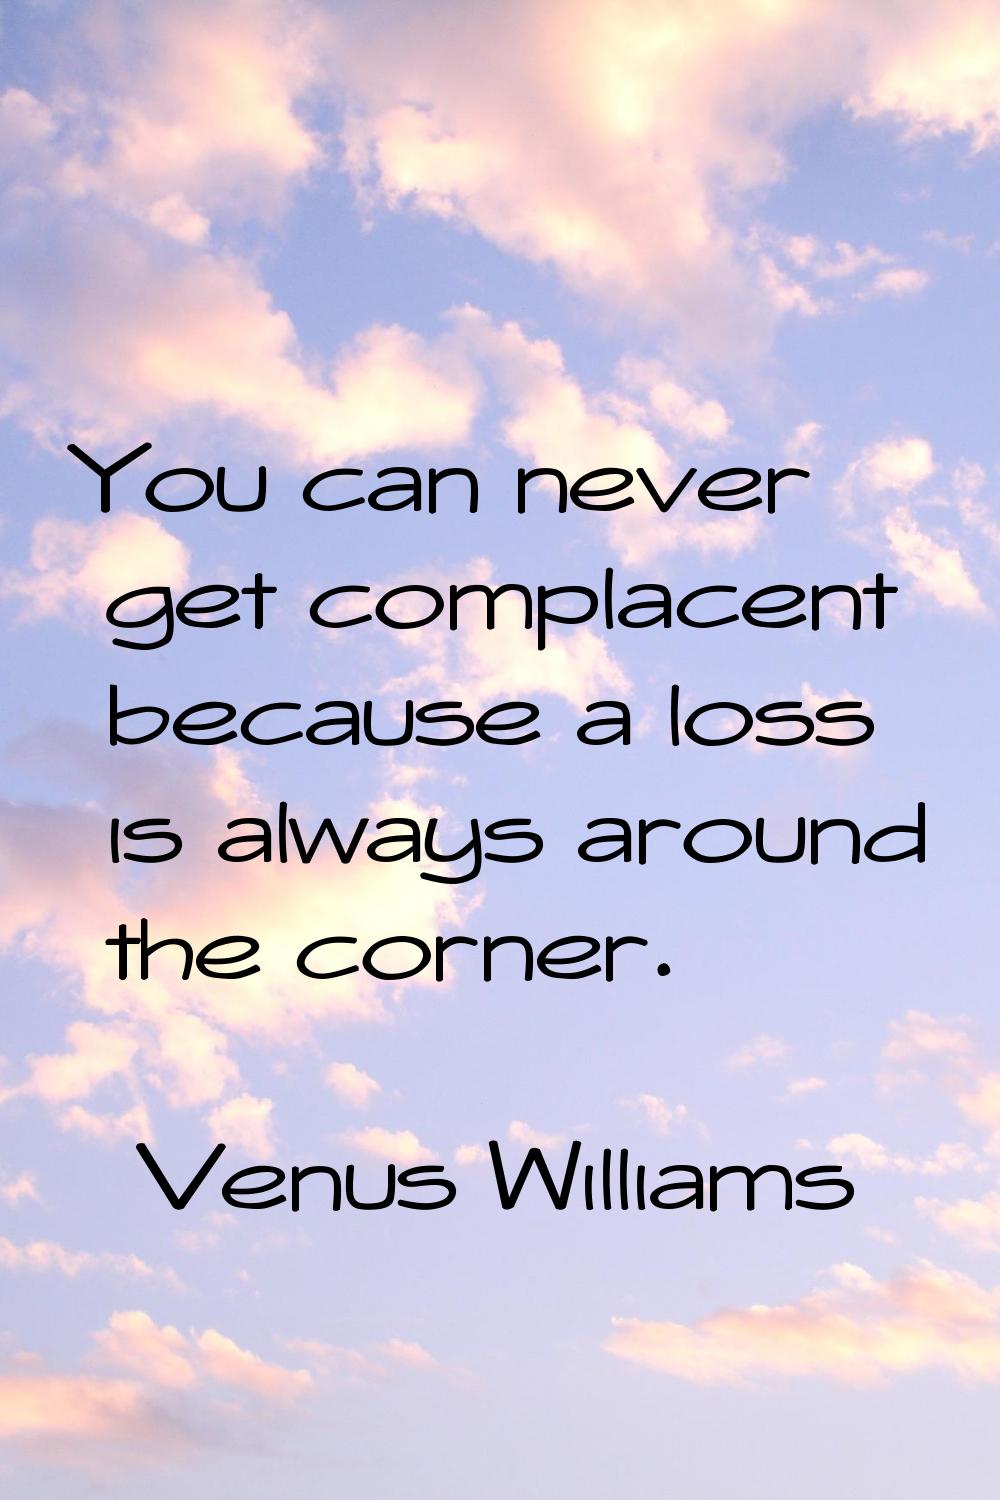 You can never get complacent because a loss is always around the corner.